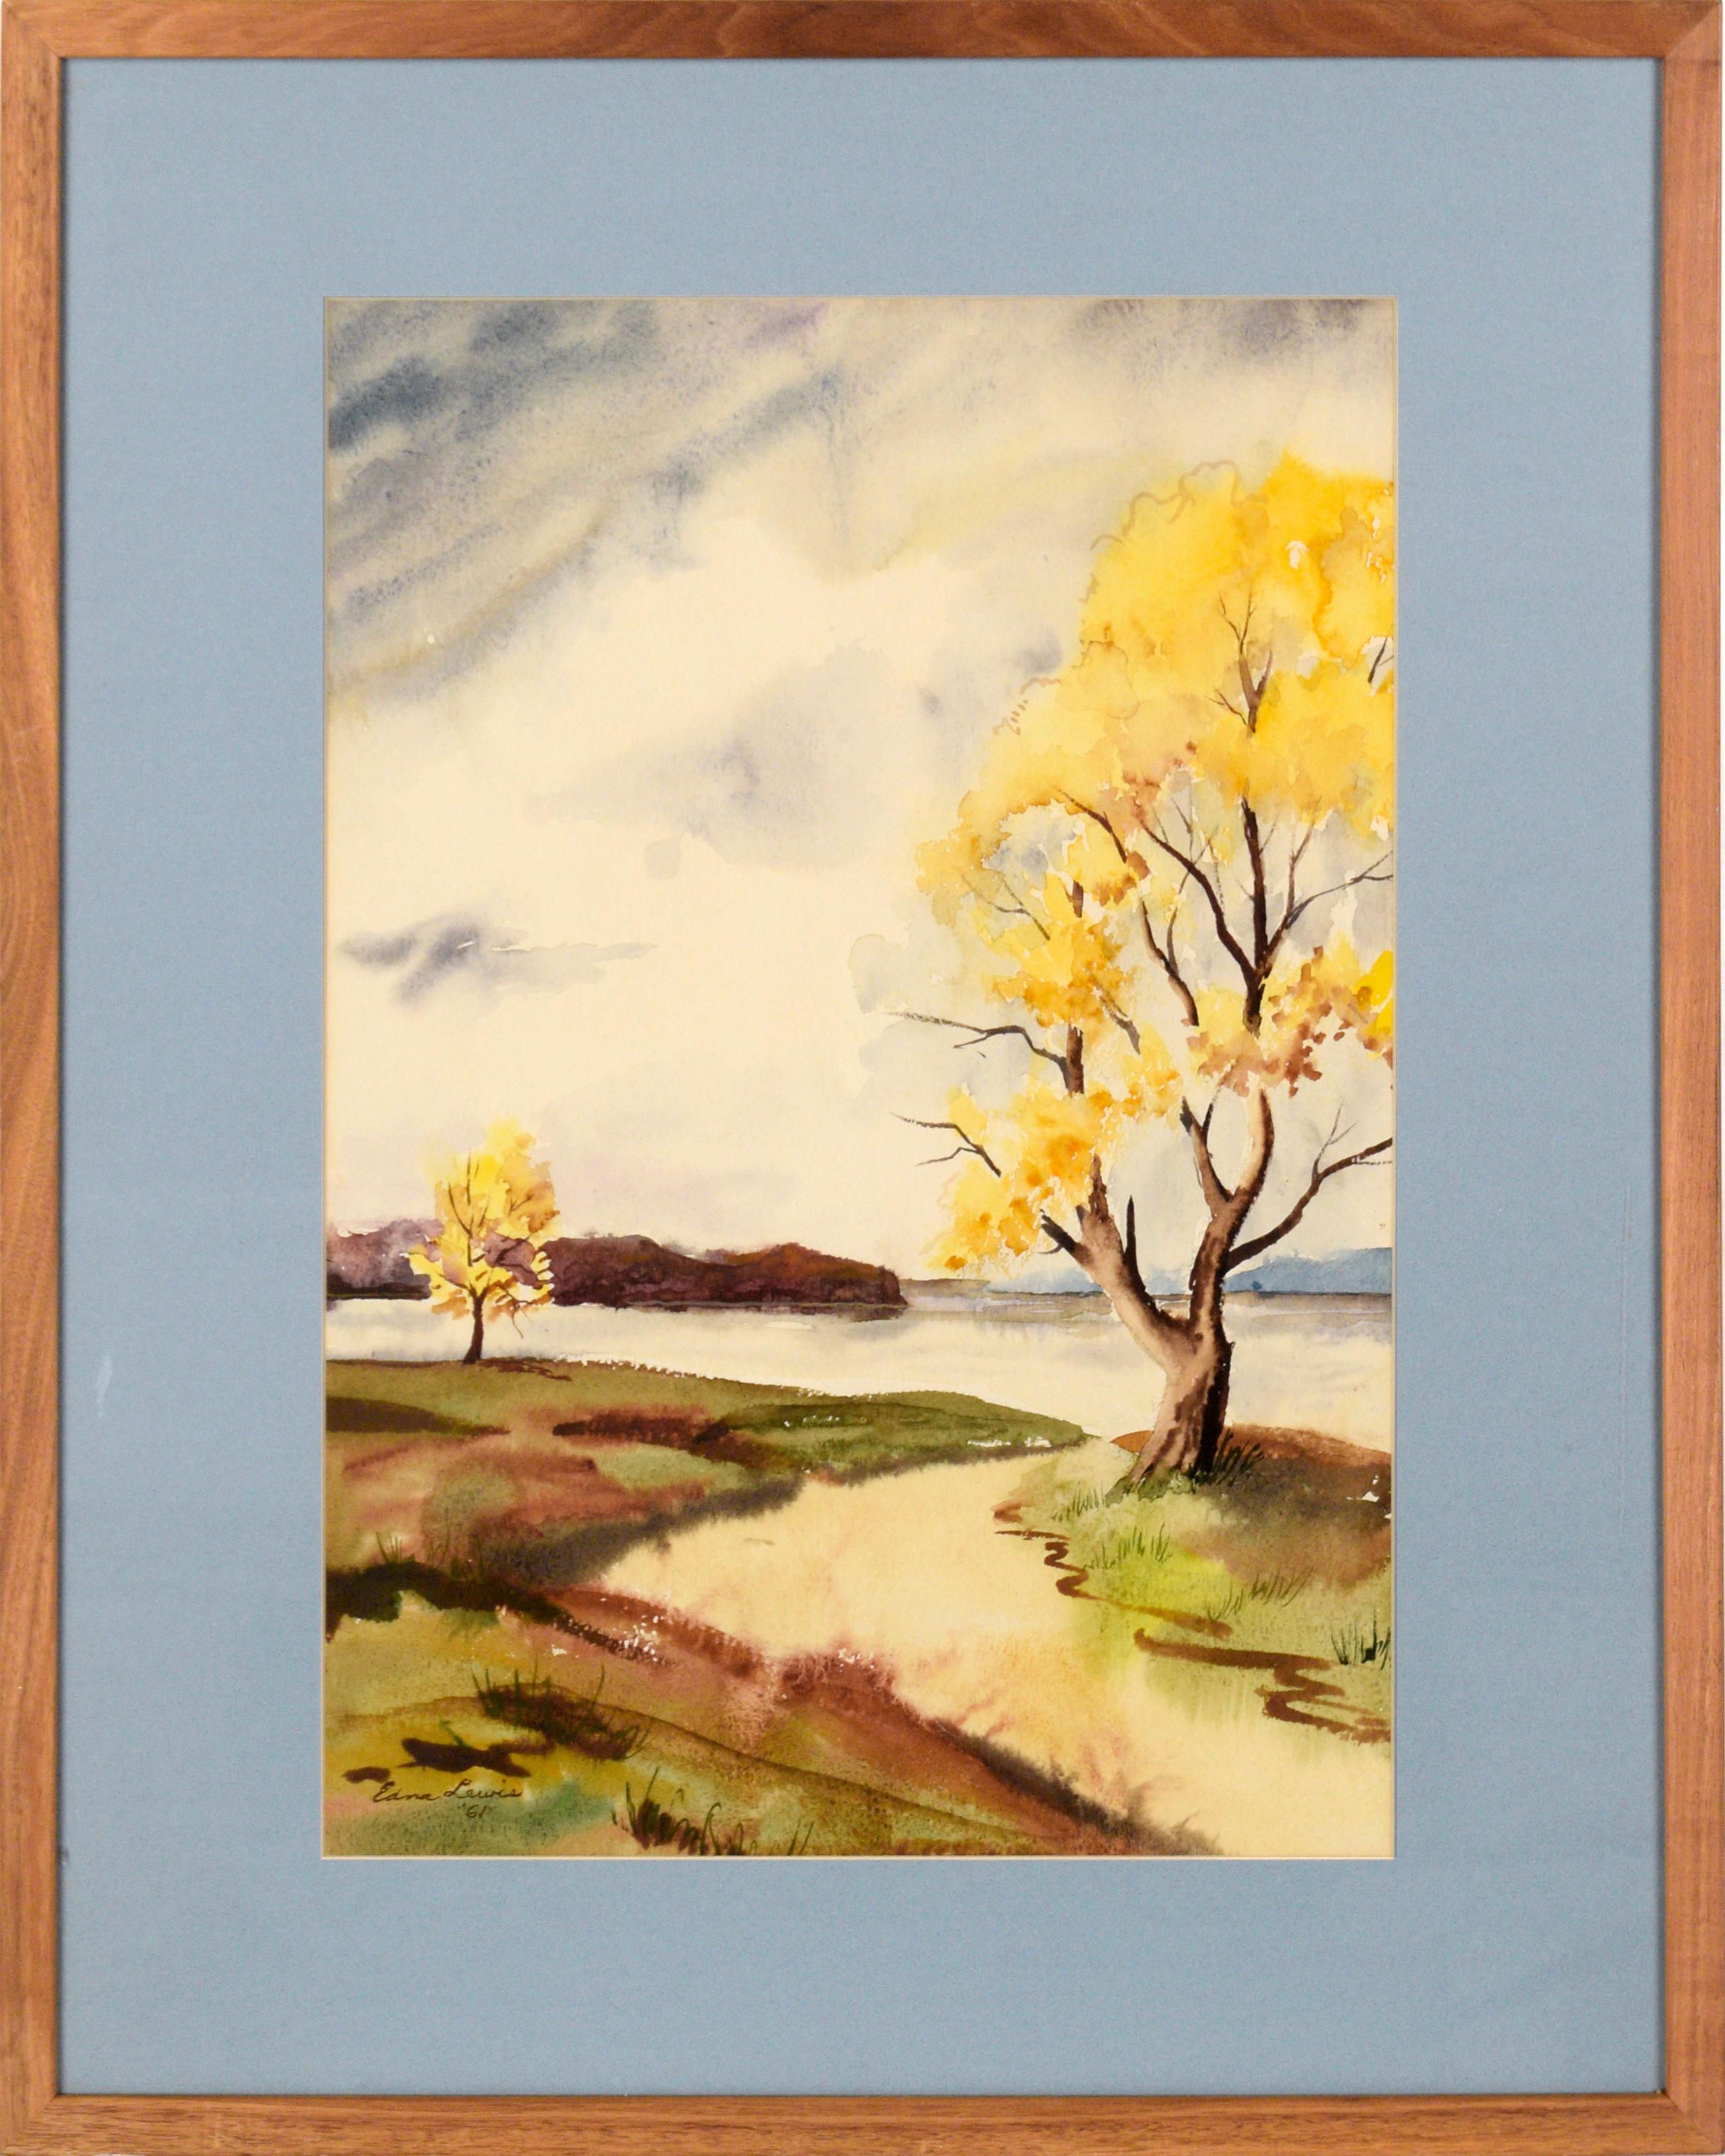 Edna Evelyn Sutherland Lewis Landscape Art - Lake Landscape with Yellow Trees - Watercolor on Paper